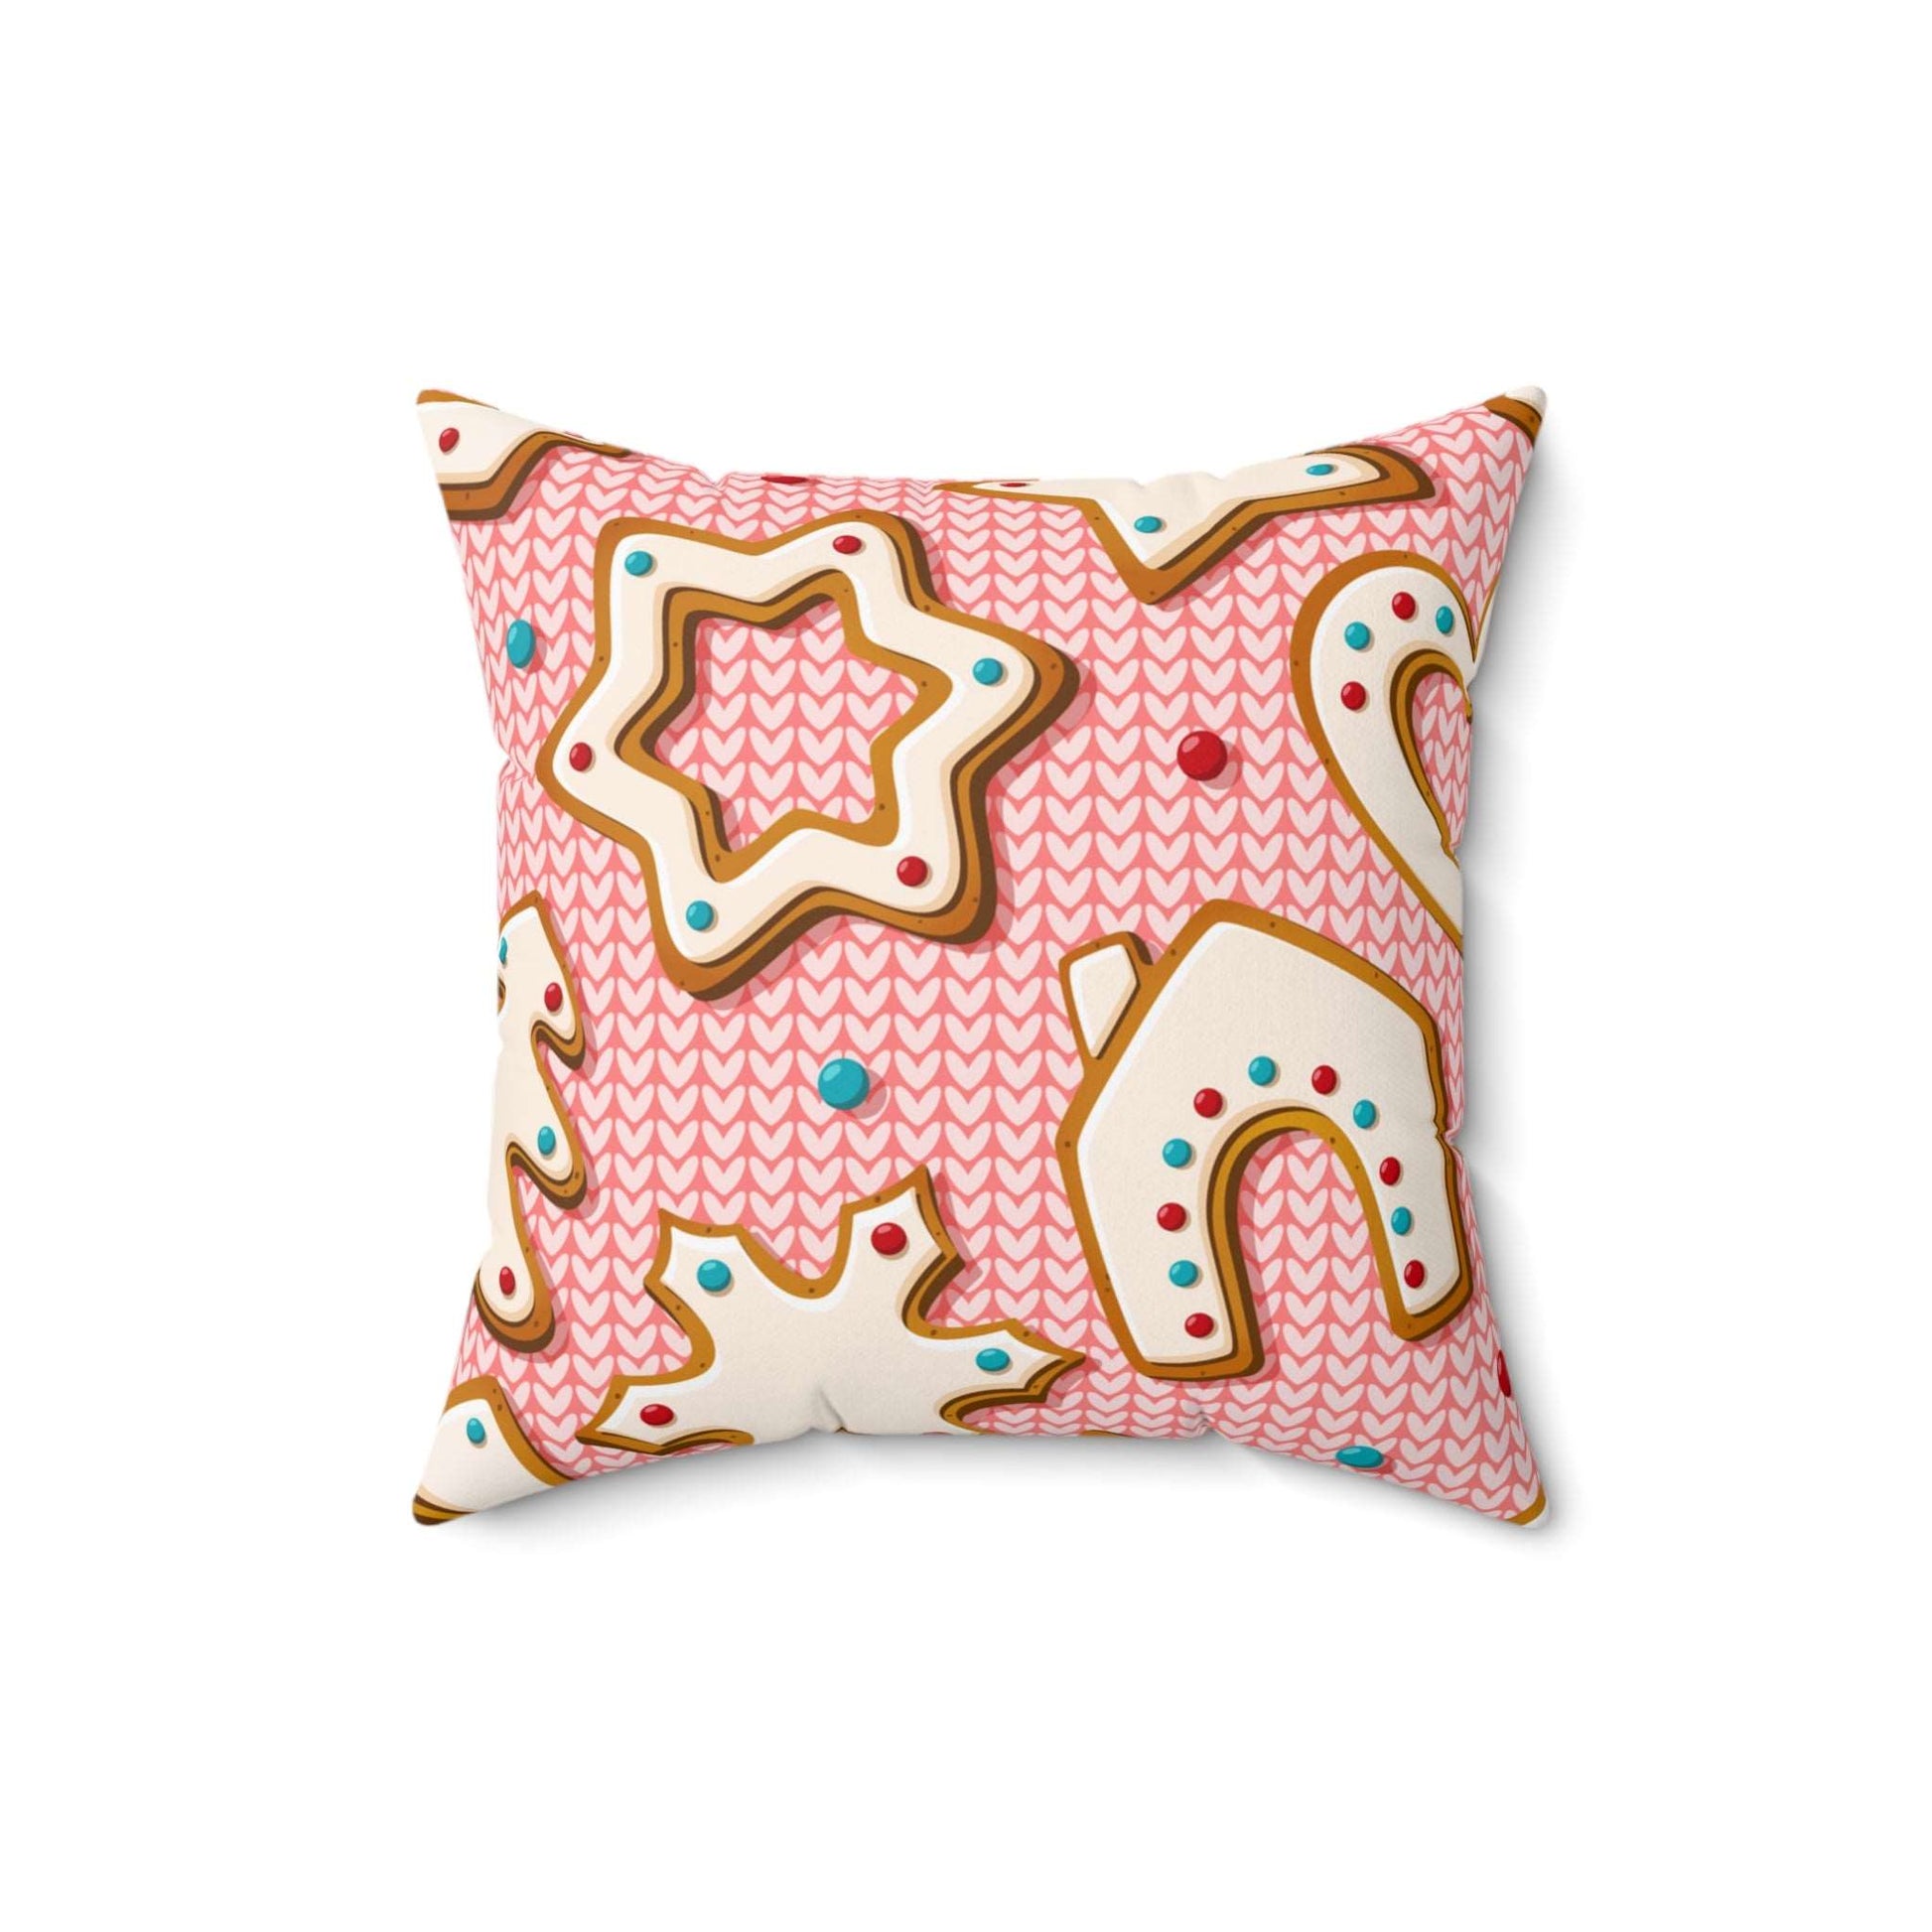 Baked Gingerbread Cookies Square Pillow